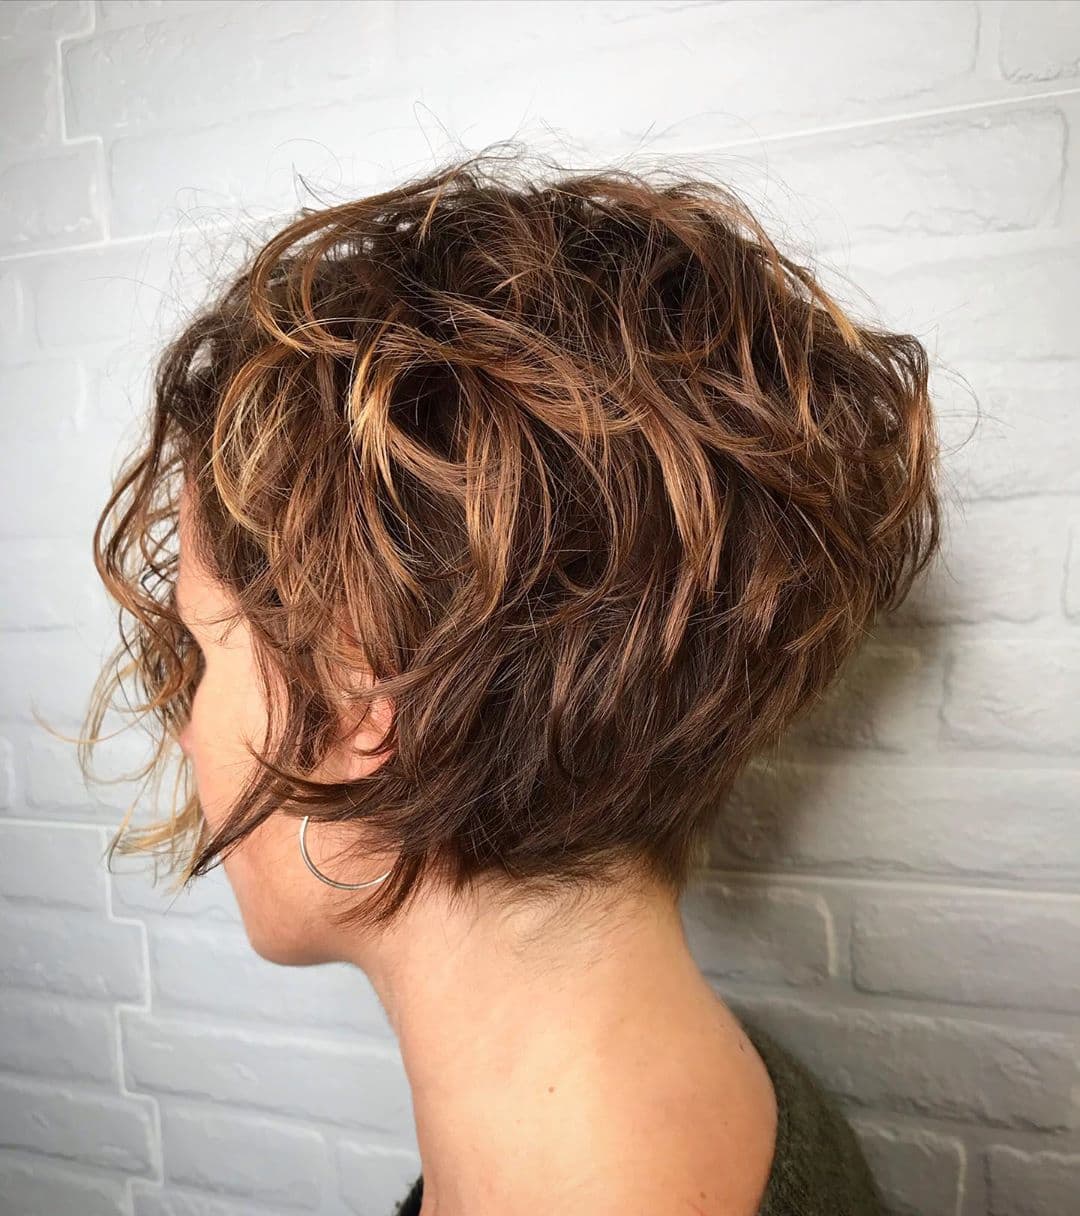 20 Perfect Looks For Short Curly Hair - StylesRant